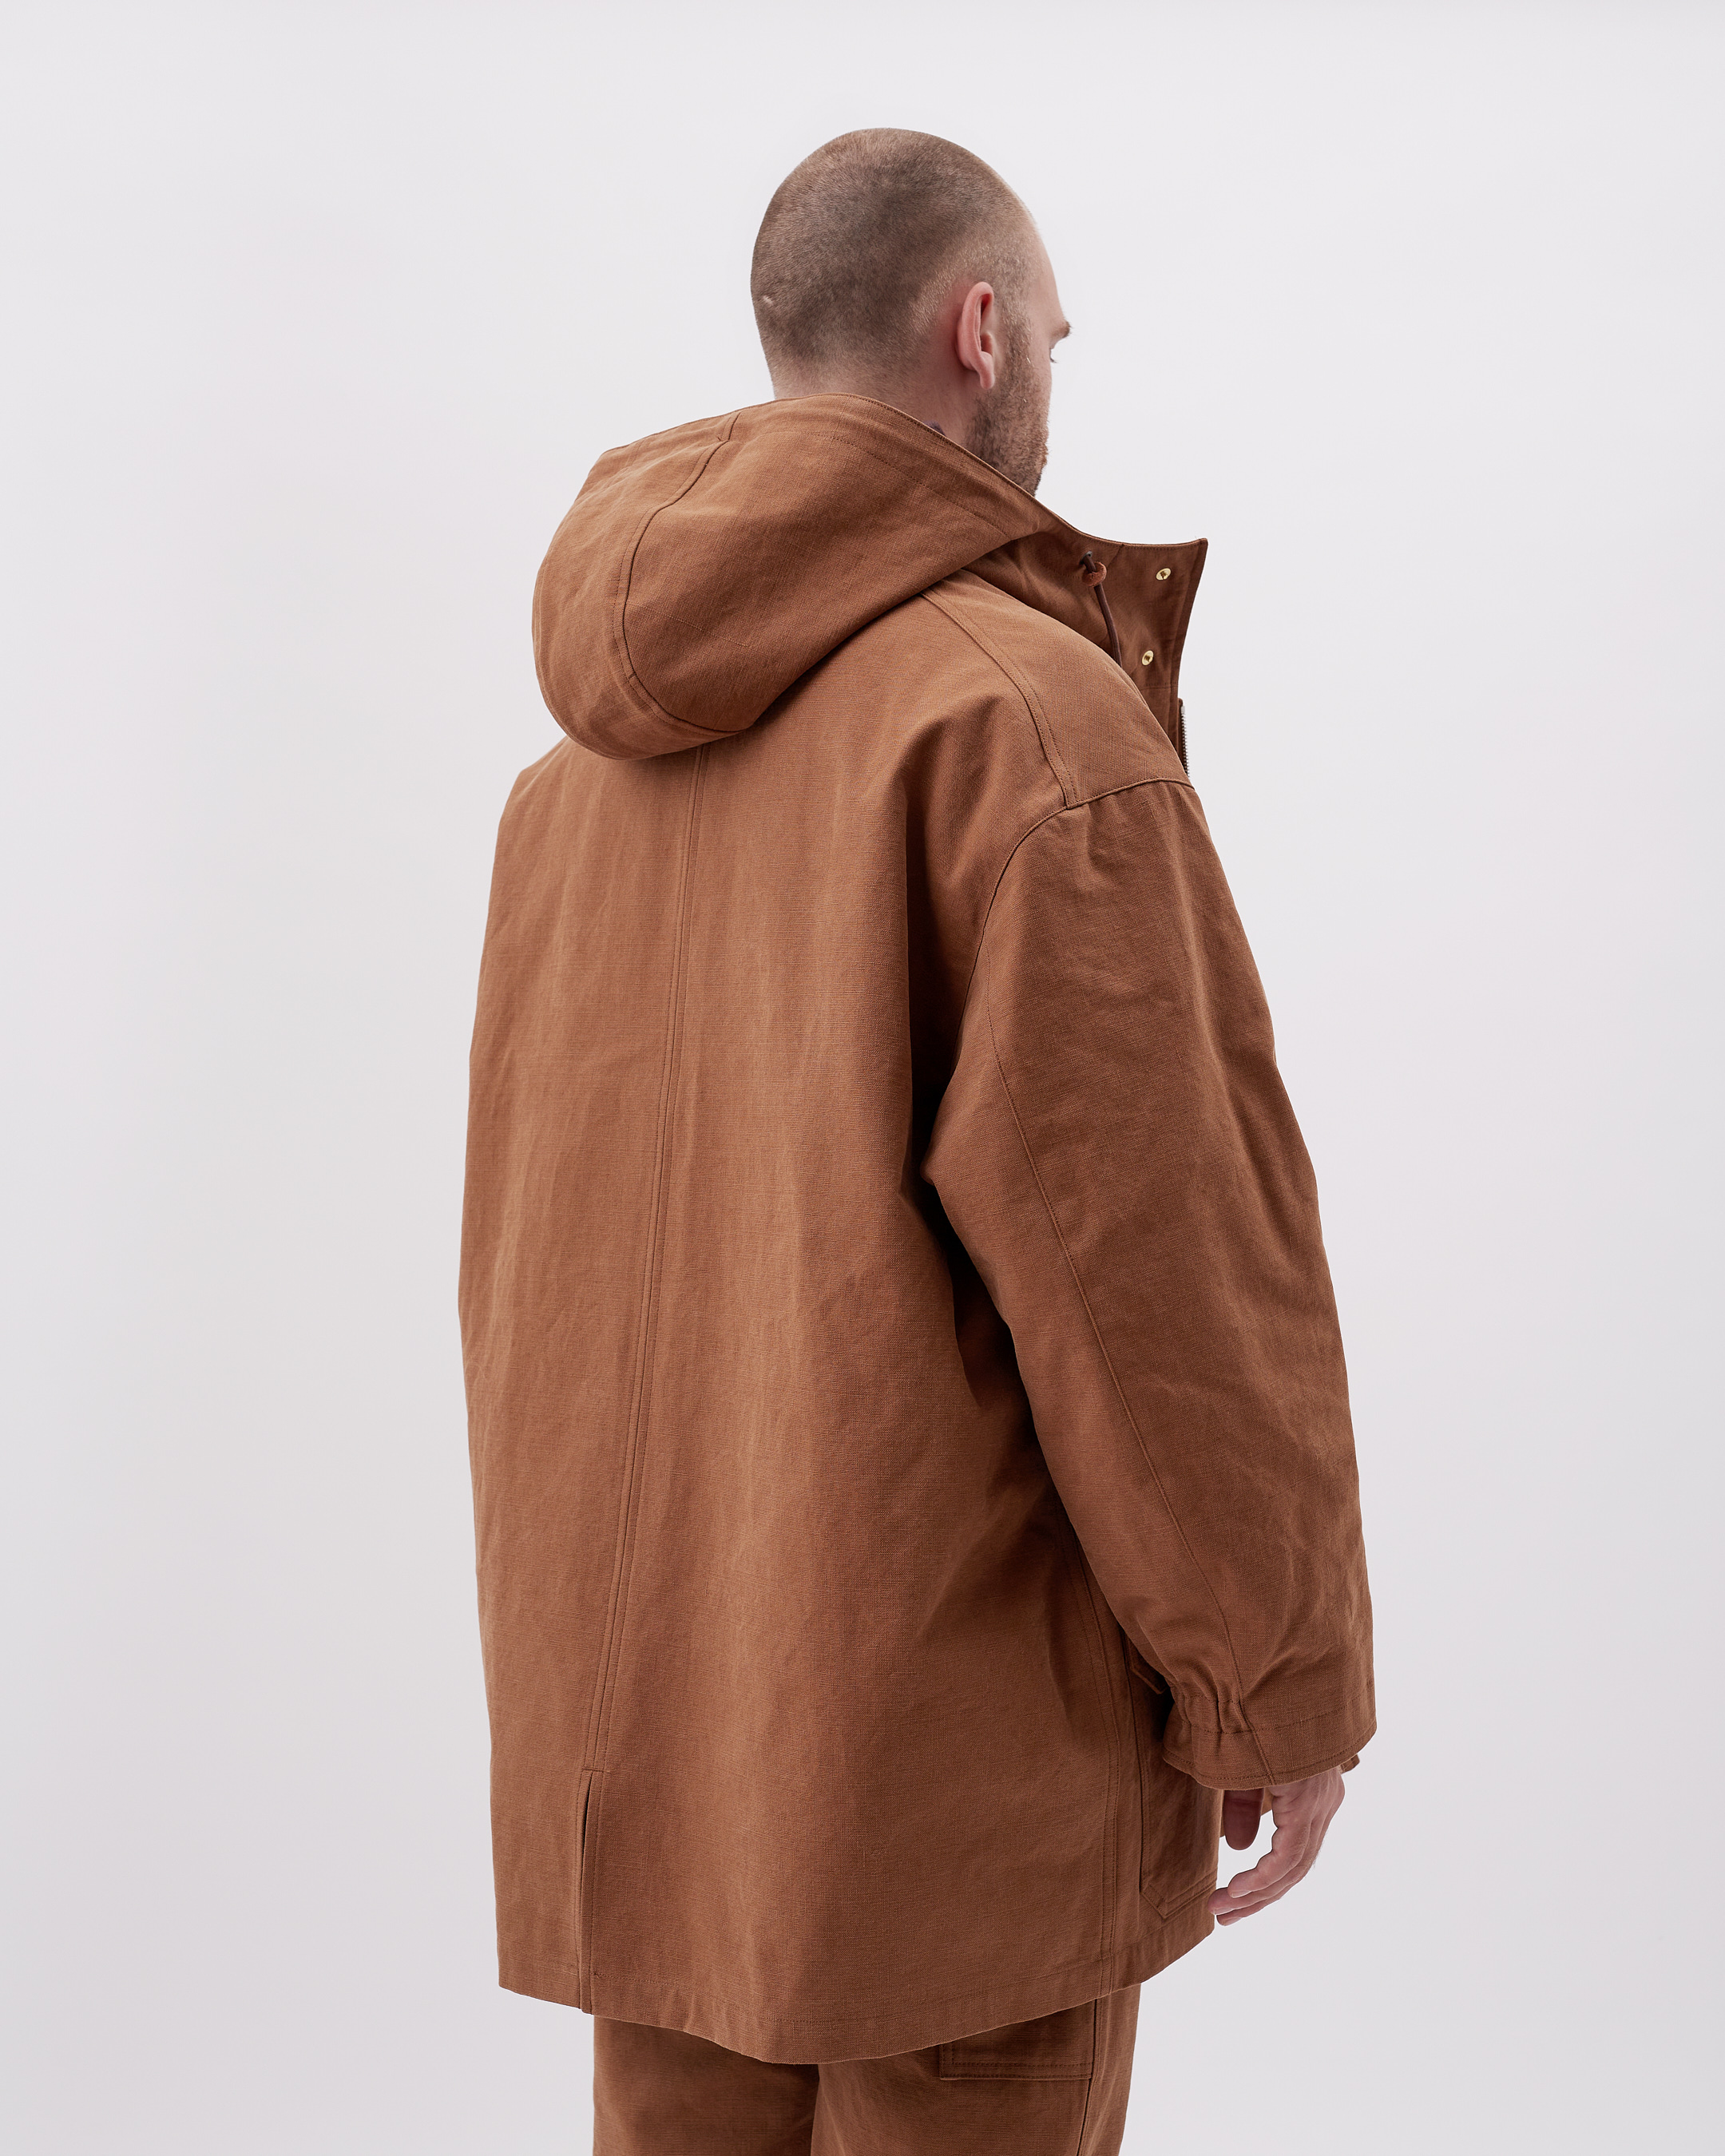 Norse Store | Shipping Worldwide - Auralee Washed Heavy Canvas